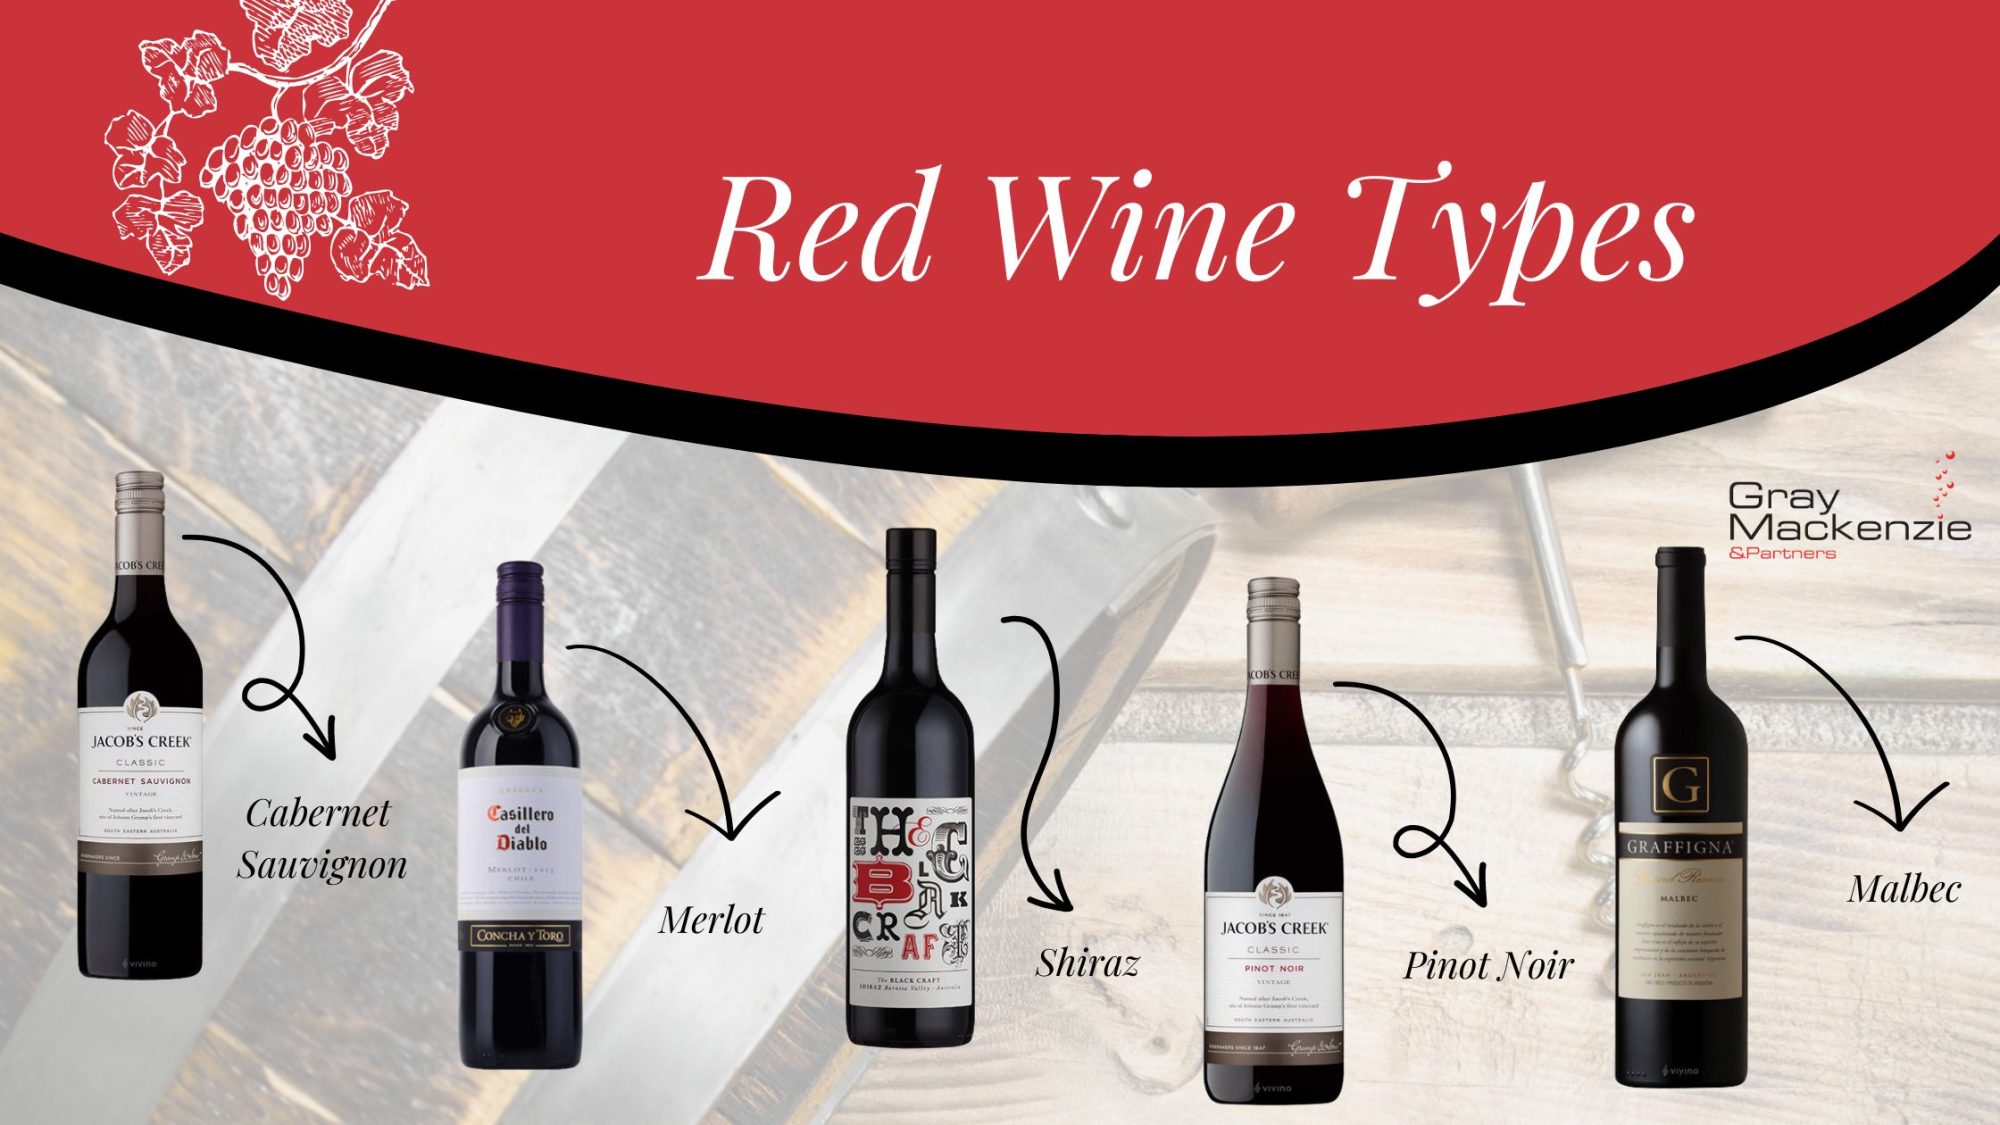 Red wine types for sale in Gray Mackenzie & Partners (GMP) stores.